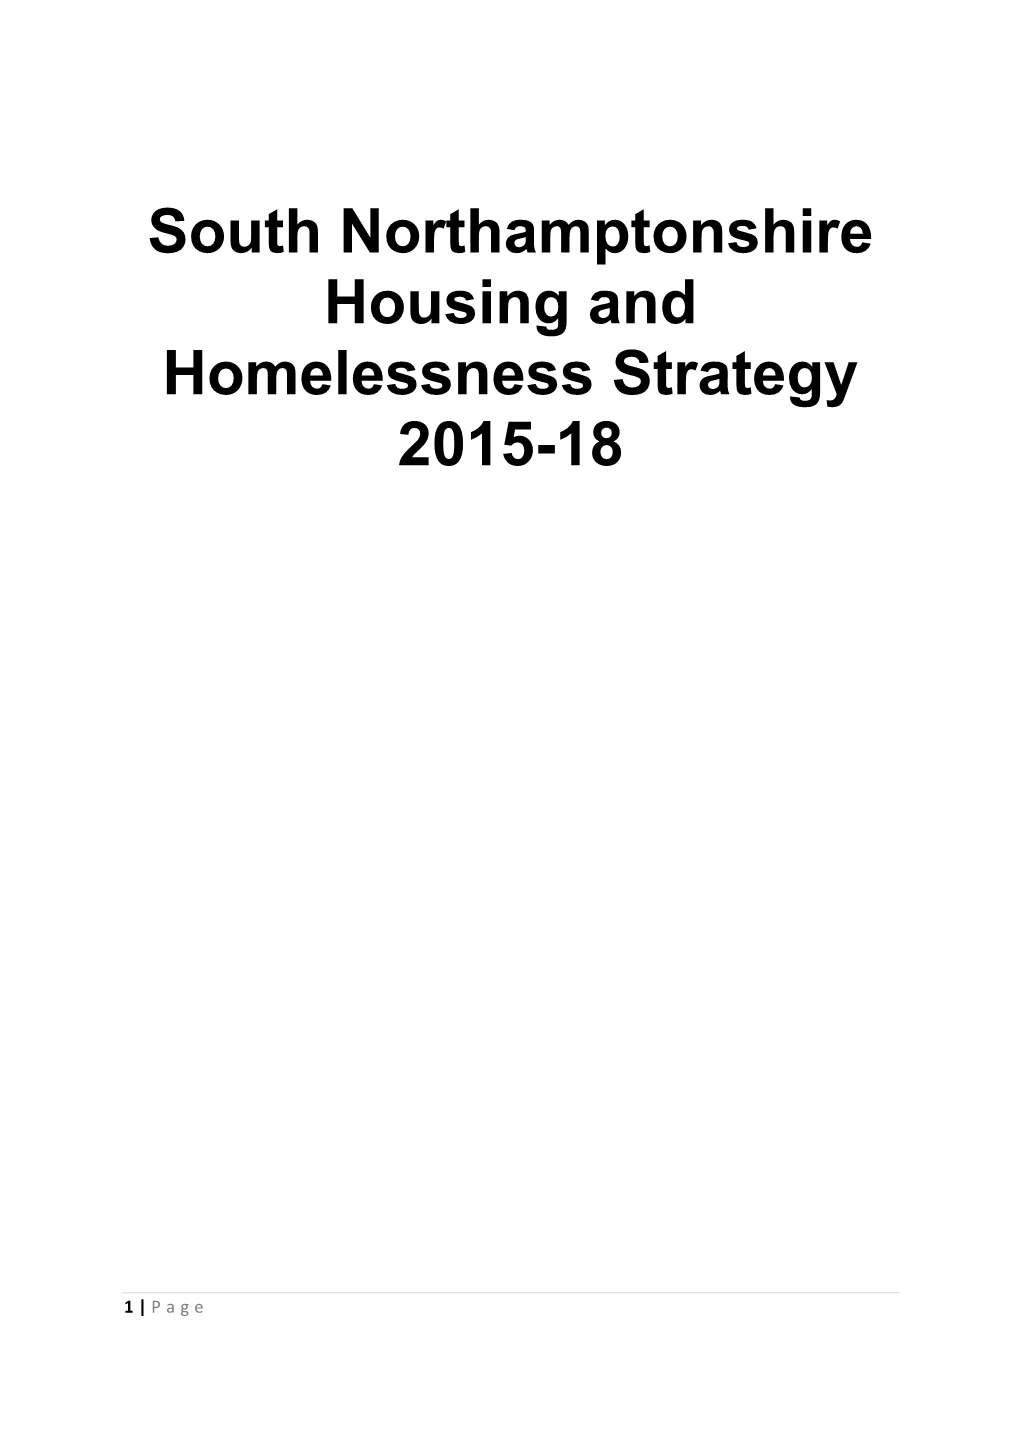 South Northamptonshire Housing and Homelessness Strategy 2015-18